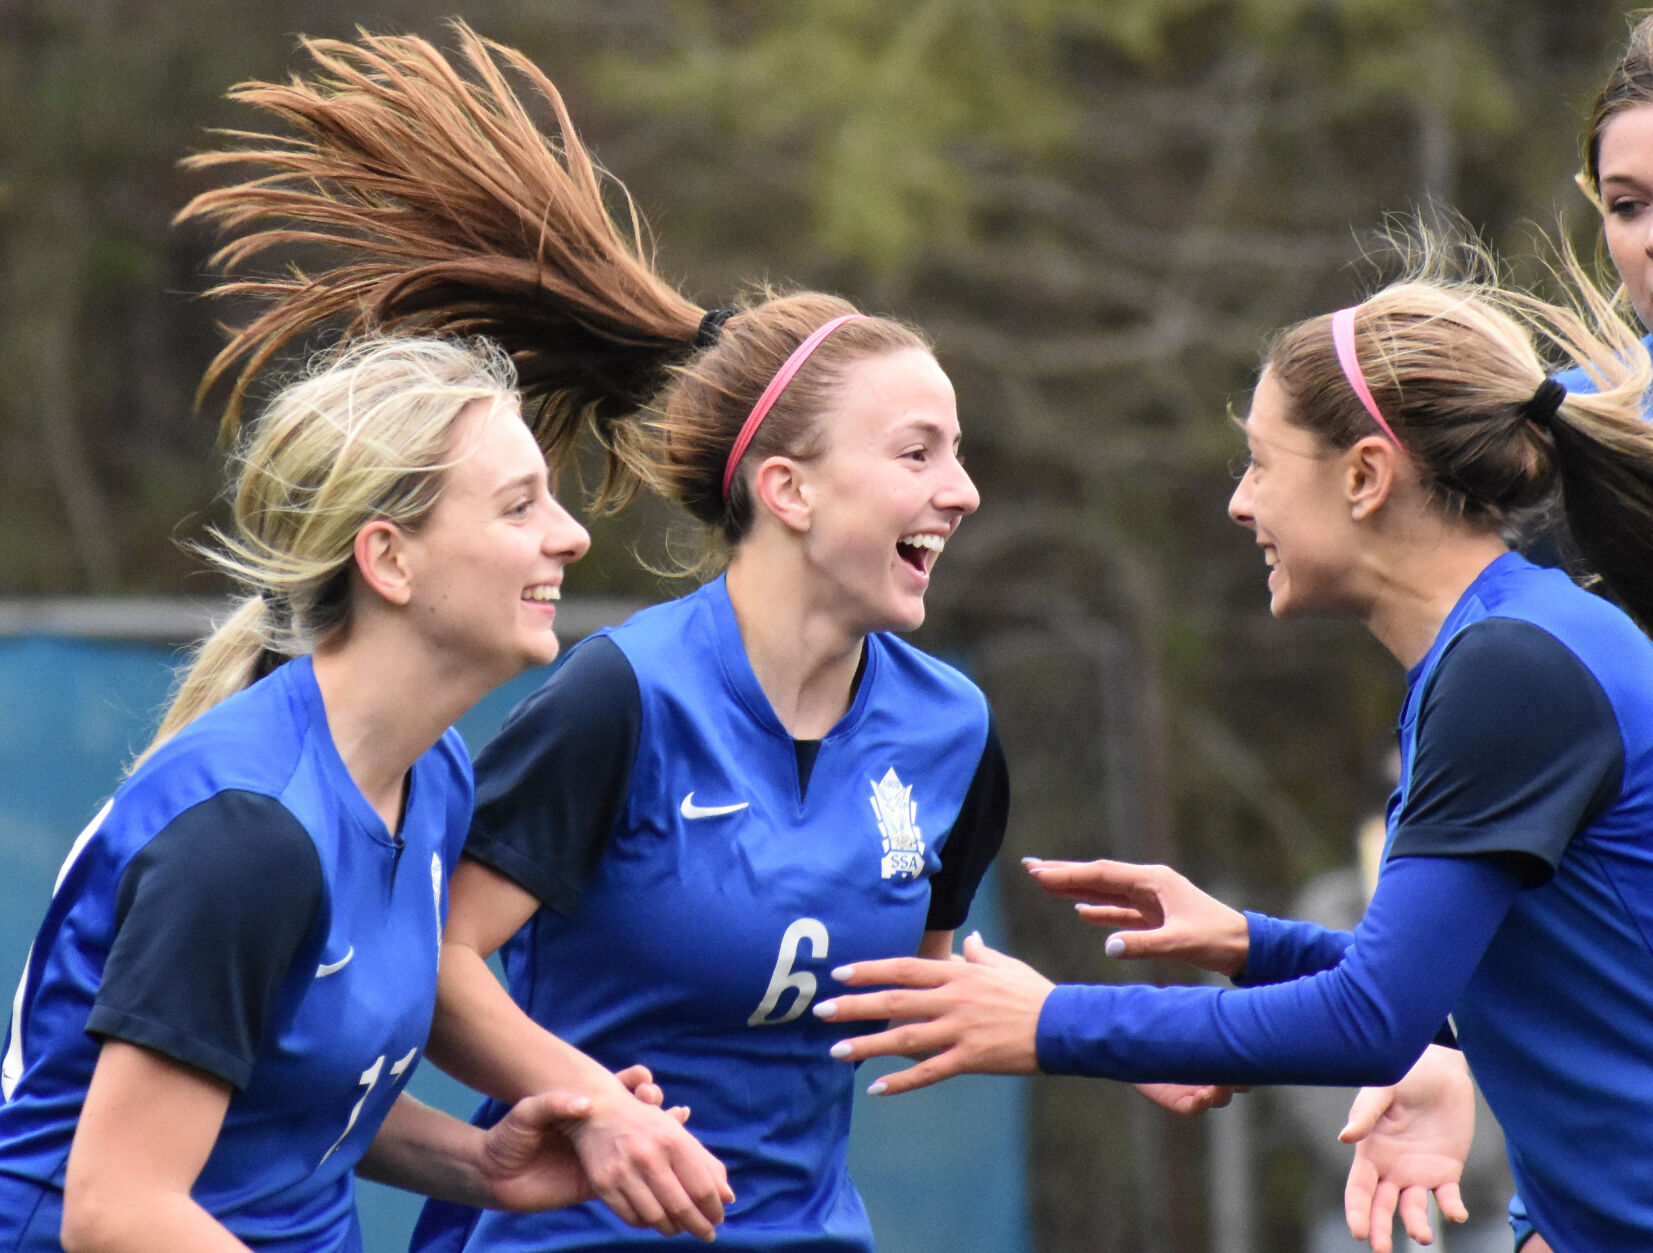 St. Scholastica Doves Secure 1-0 Semifinal Win, Carlie Perrin Leads Team to Victory